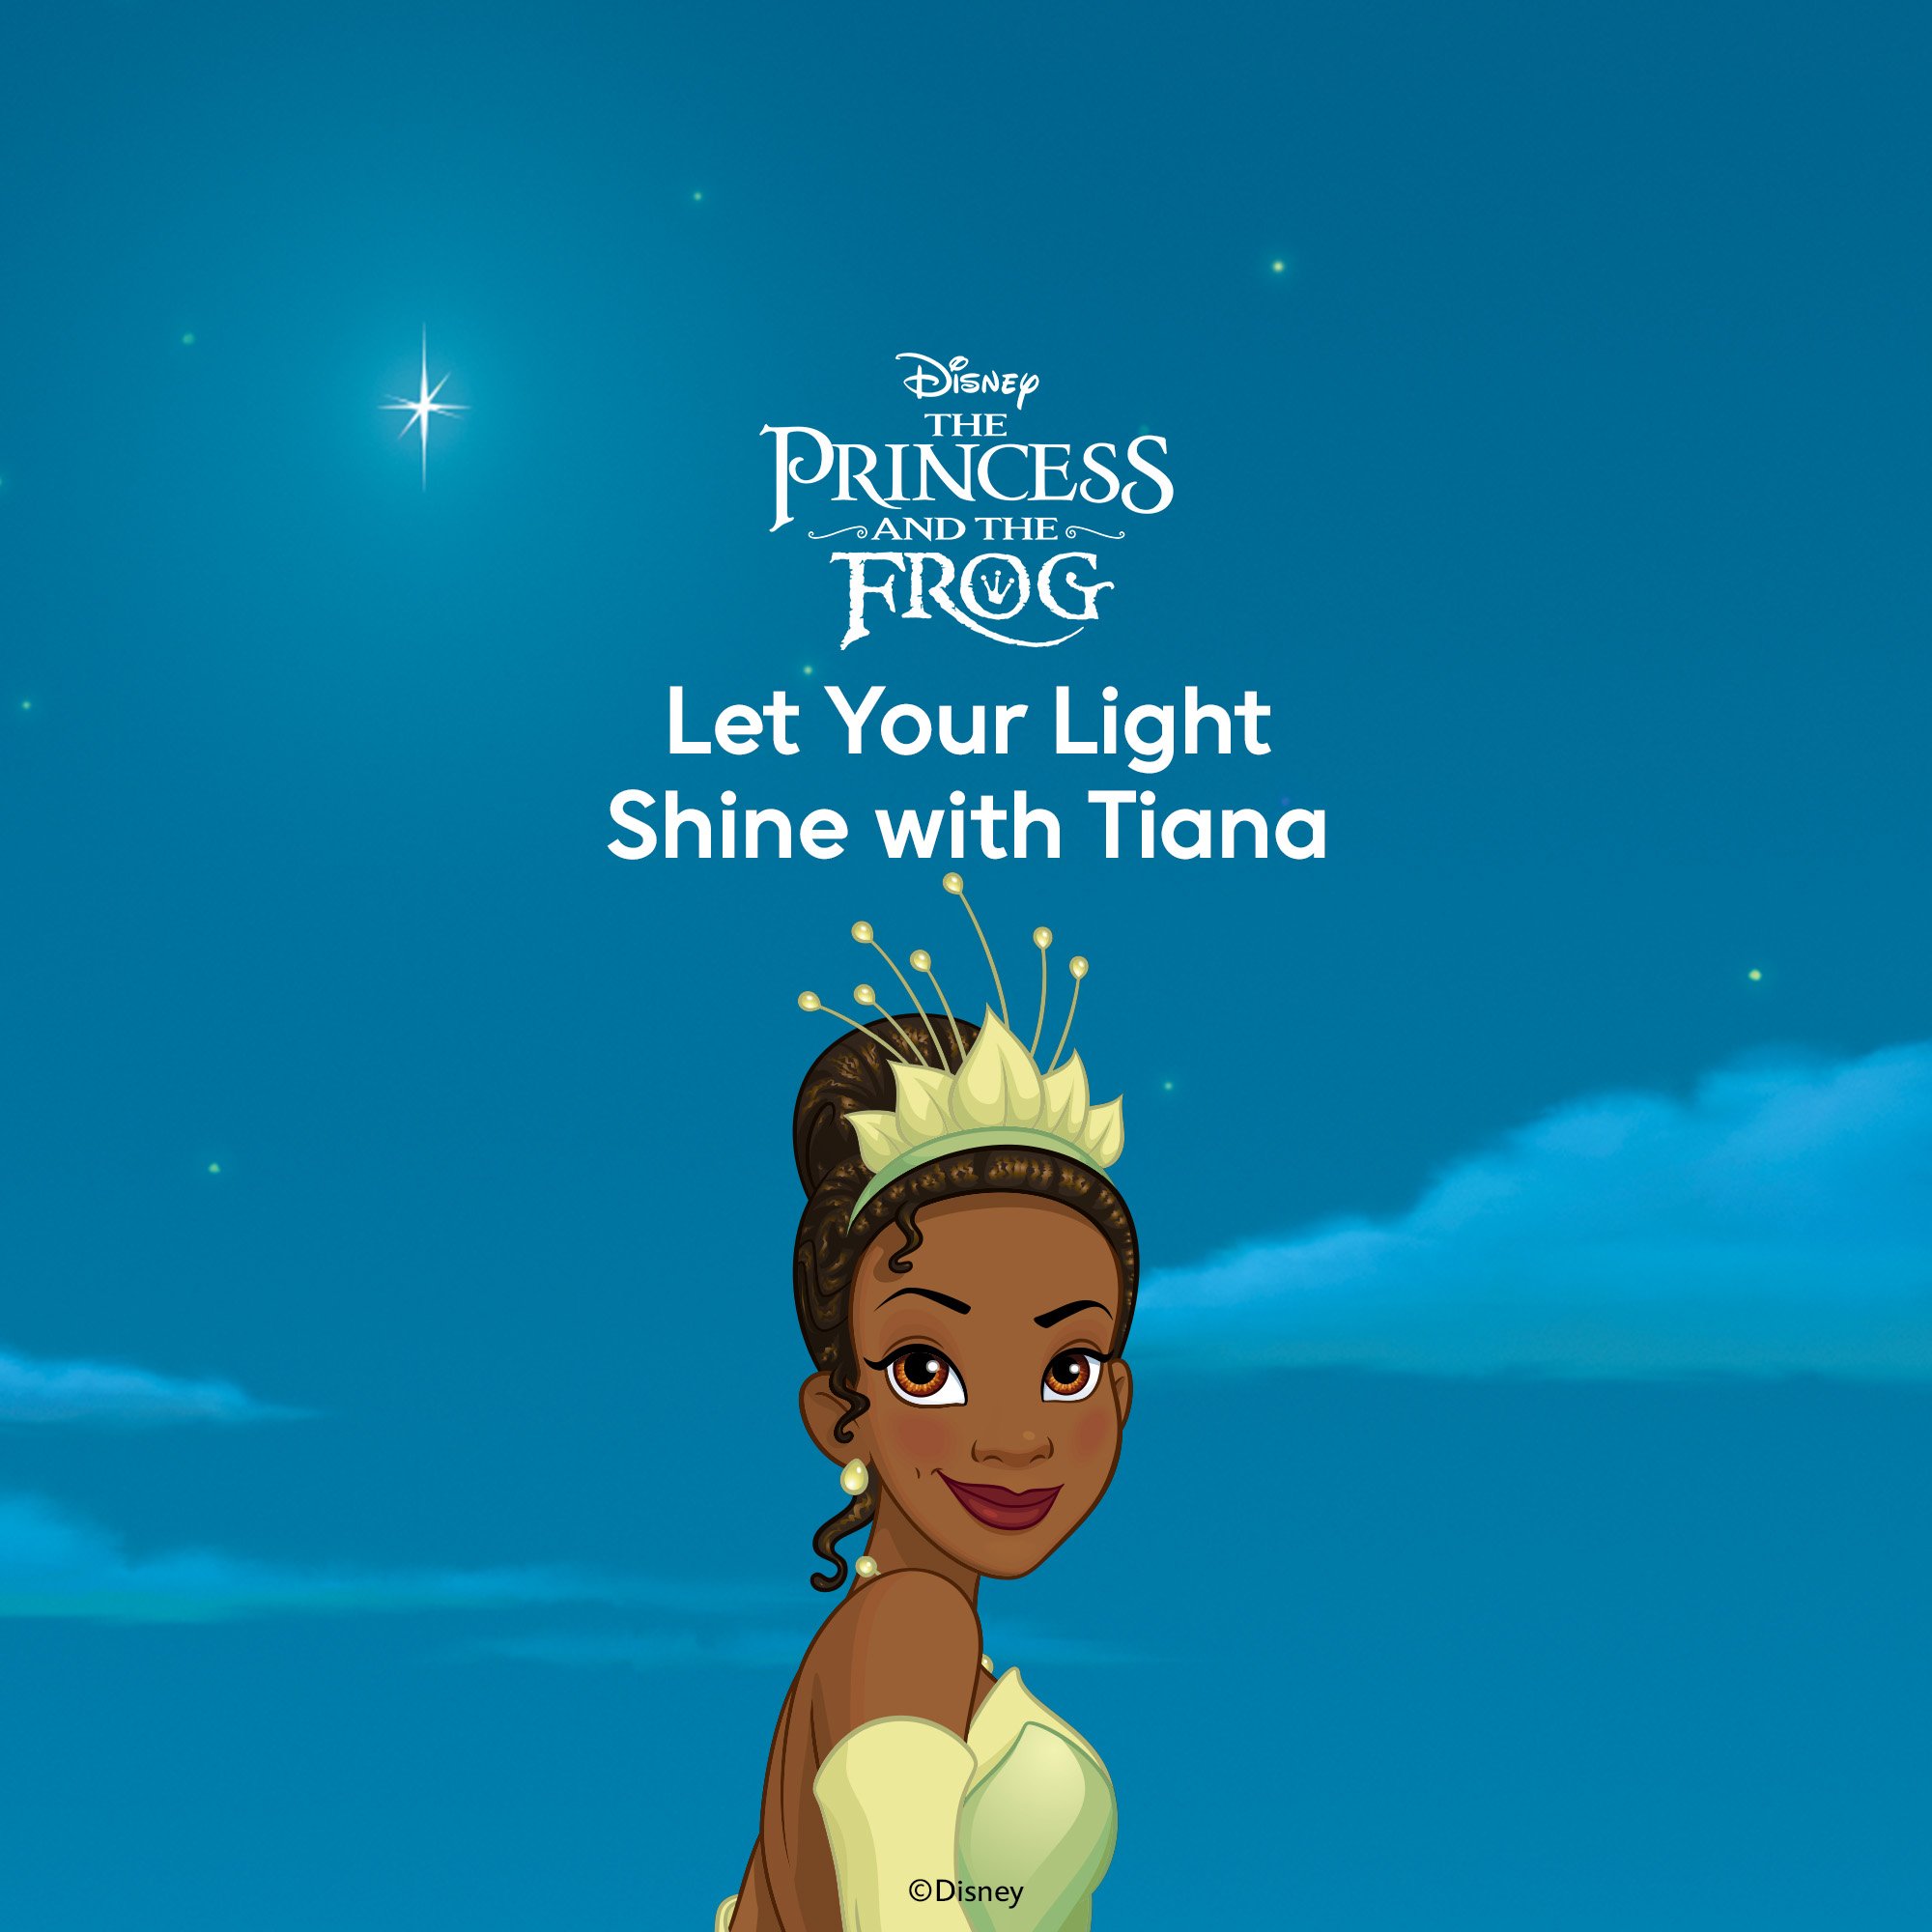 Let Your Light Shine with Tiana Cover.jpg